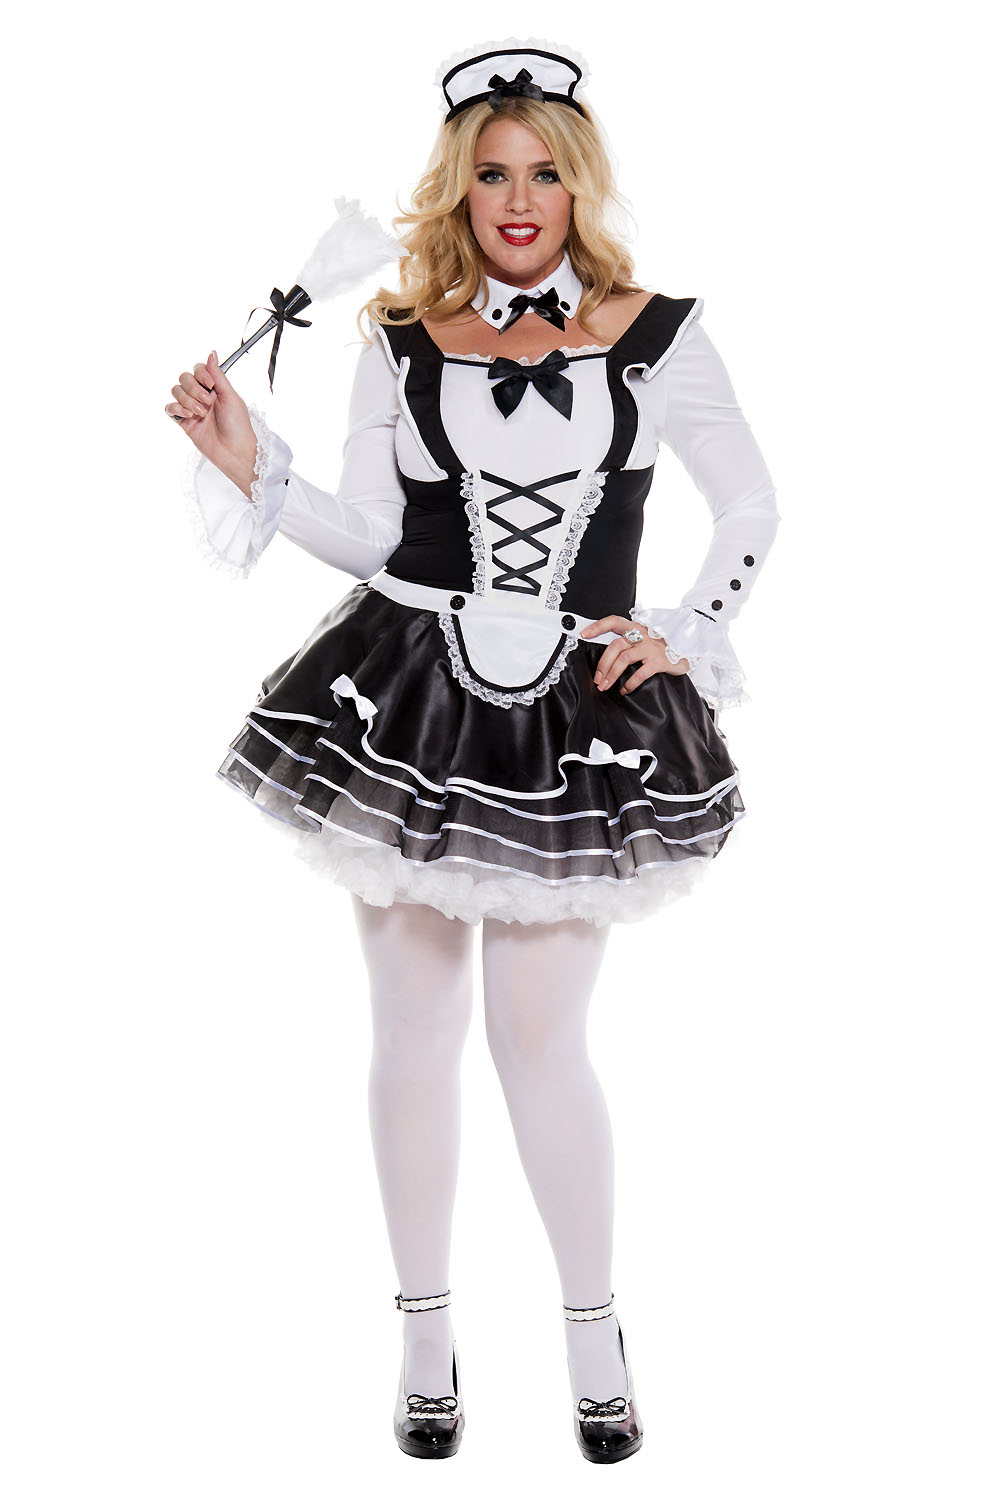 Adult Proper French Maid Plus Size Woman Costume | $60.99 | The Costume ...